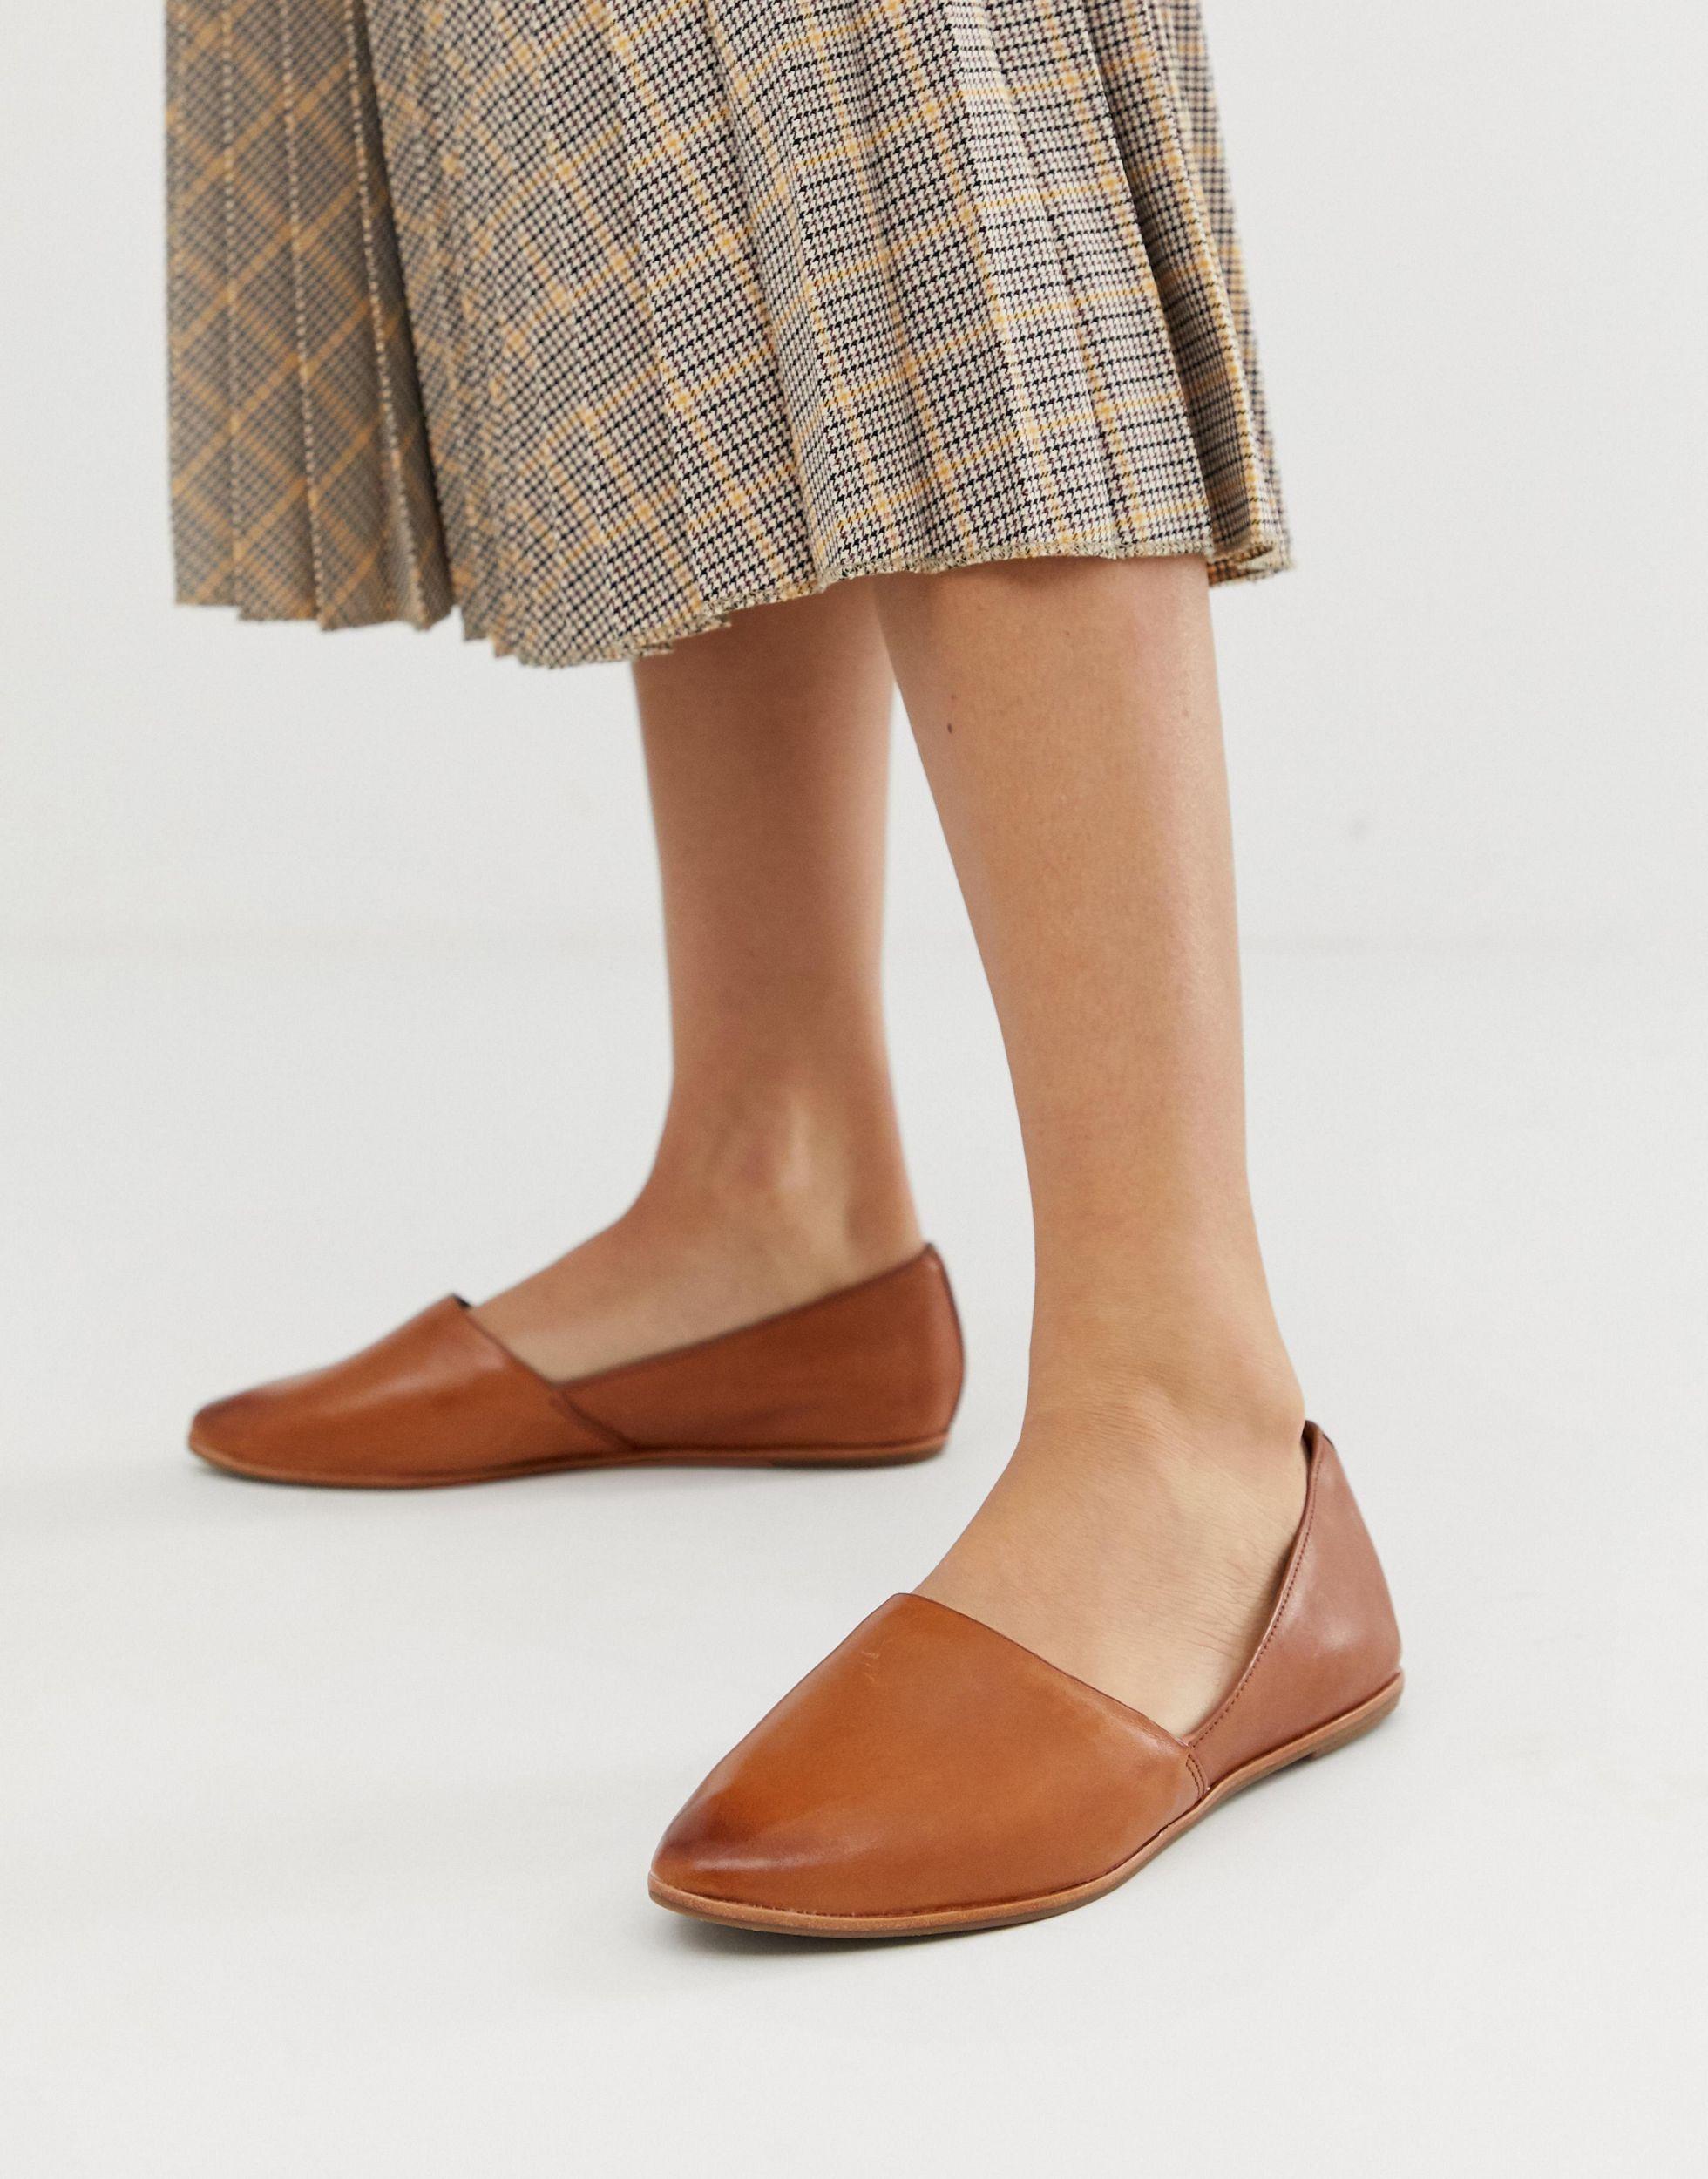 ALDO Blanchette Leather Flat Shoes in Brown | Lyst